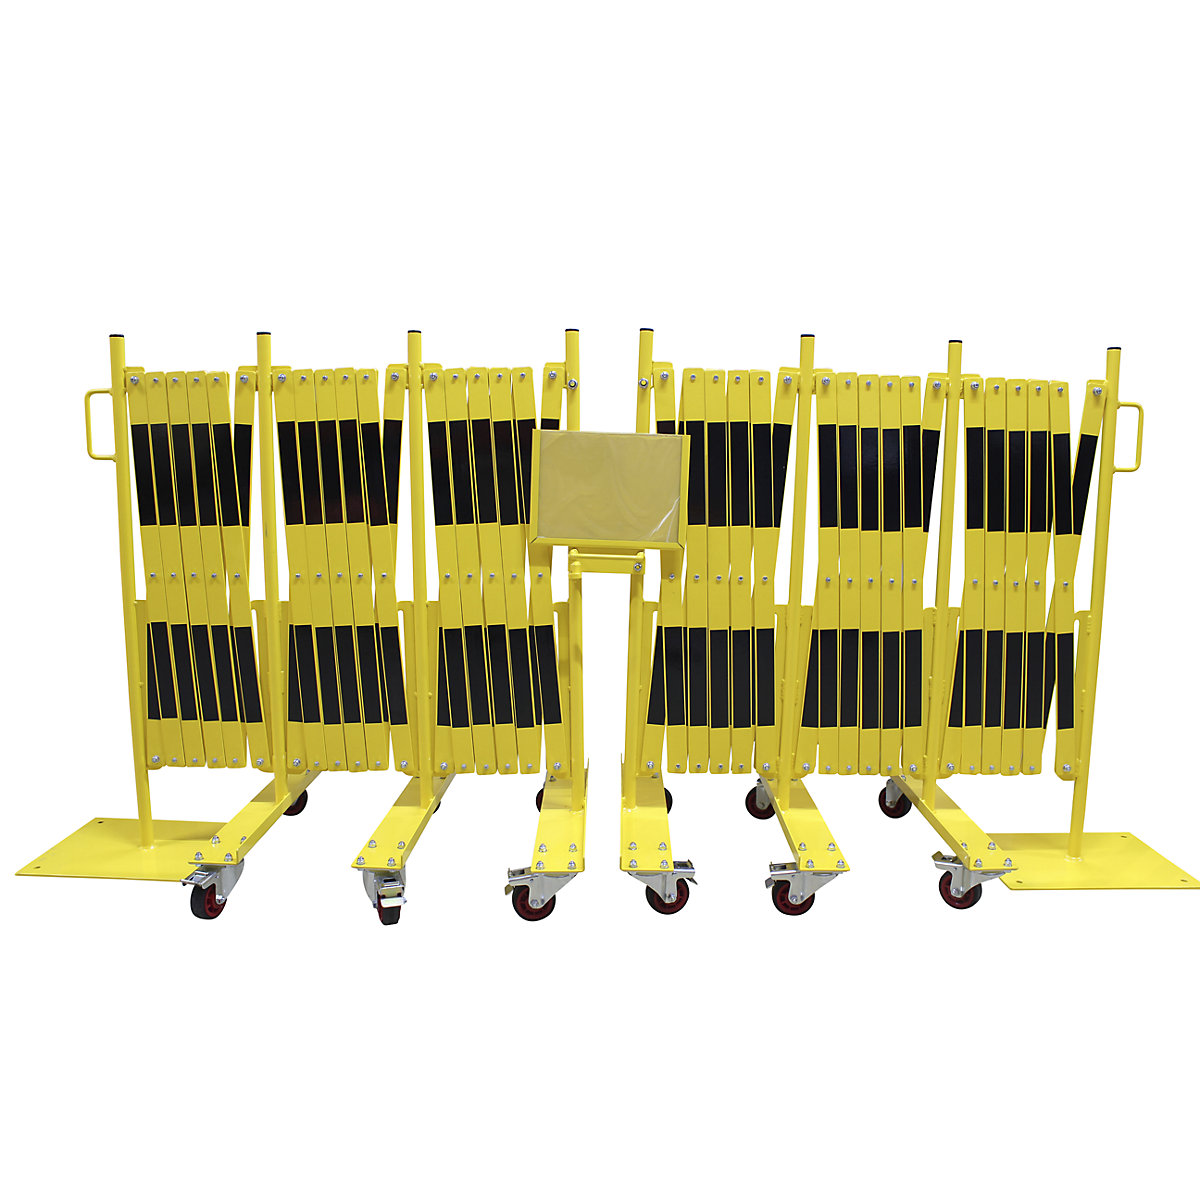 Expanding barrier, steel foot and castors, yellow / black, max. length 16000 mm-5